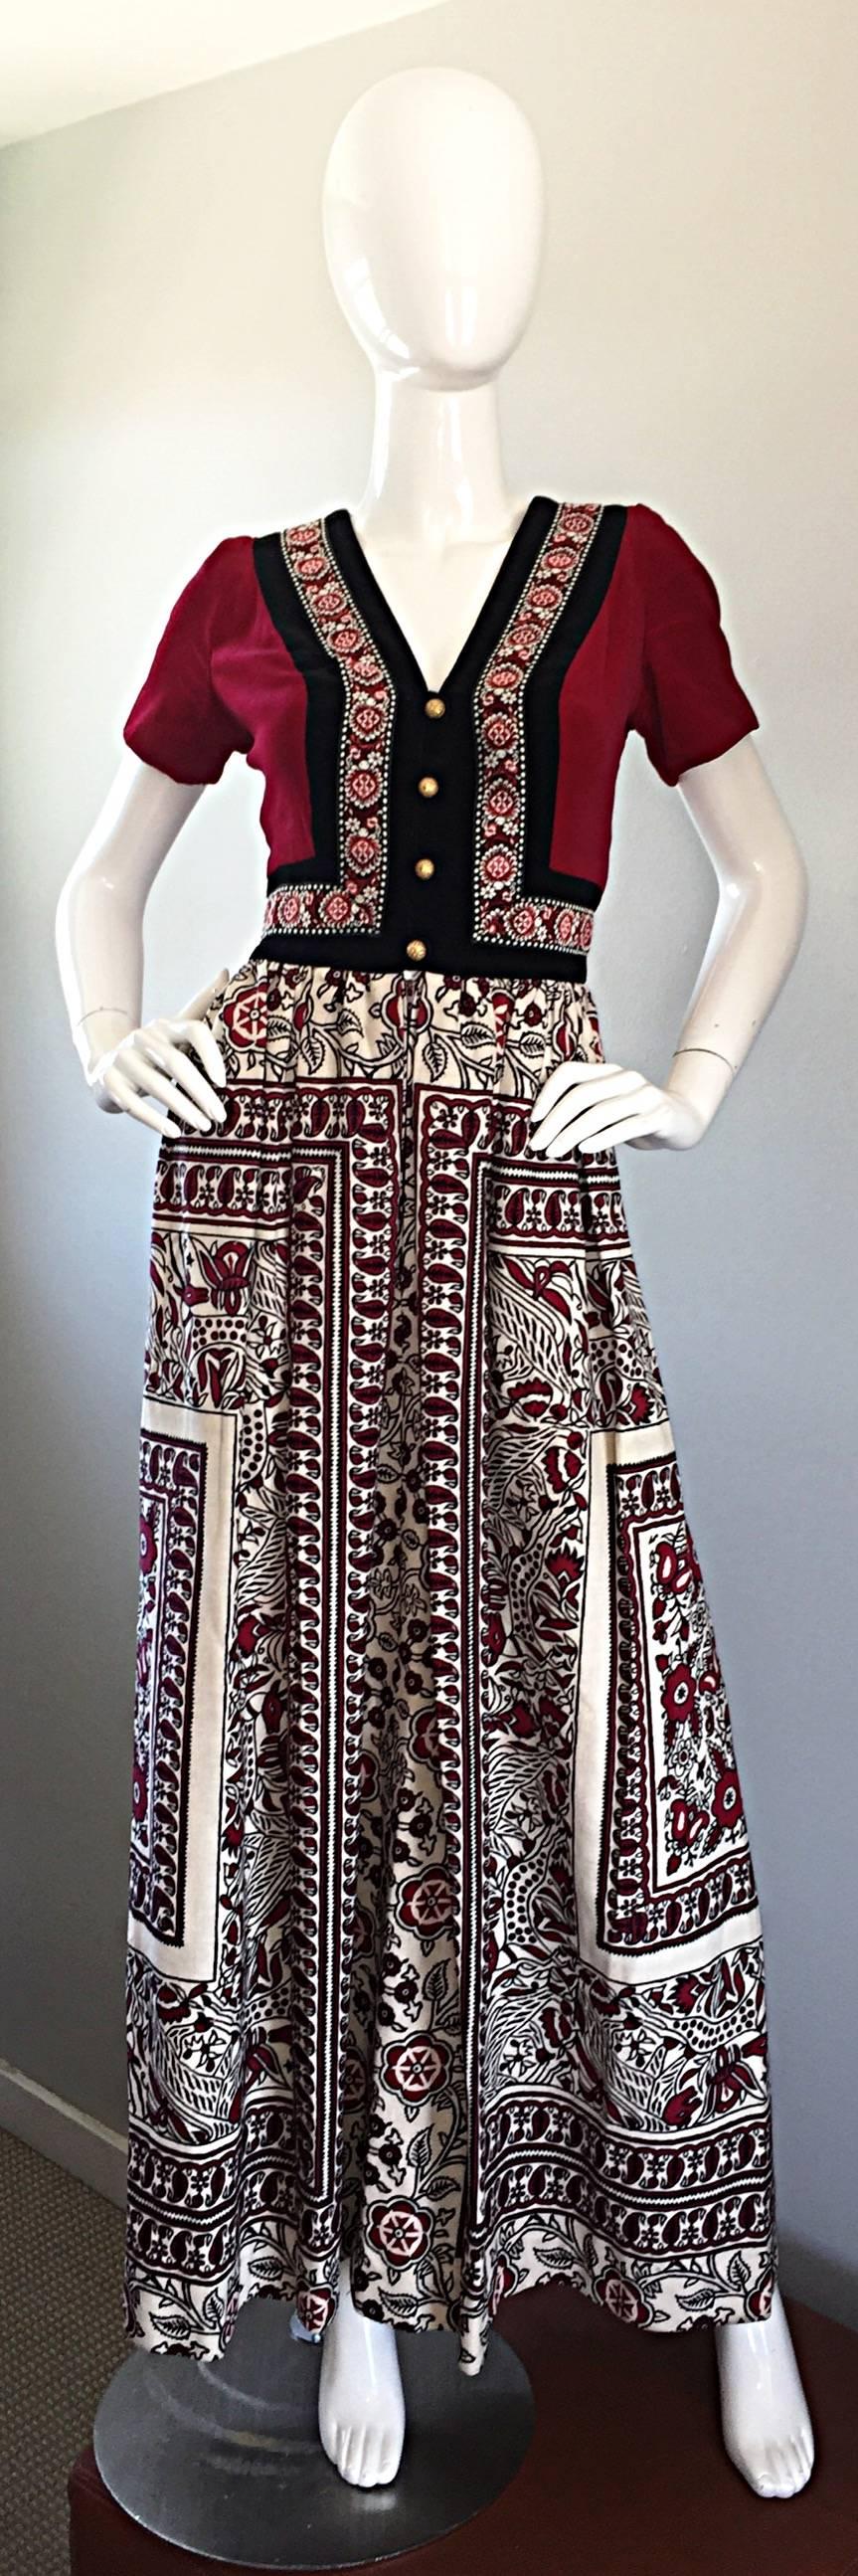 Extremely rare vintage early 70s late 1960s / 60s JAY MORLEY for FERN VIOLETTE bohemian / boho maxi dress! Jay Morley was a well established designer for MGM Studios back int he day. He had a very successful sought-after limited run as a fashion